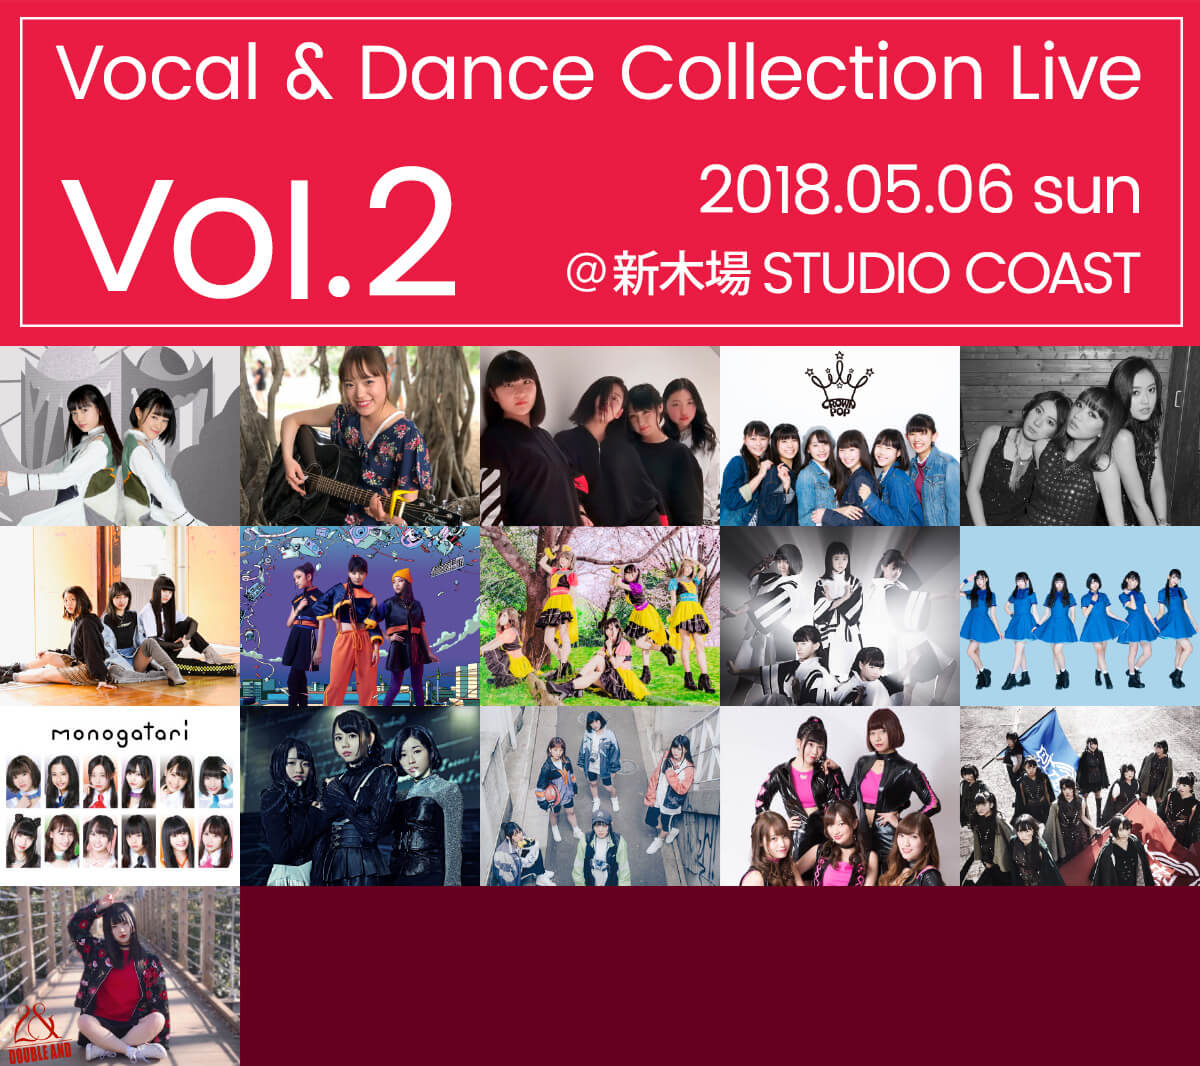 Vocal & Dance Collection Vol.2